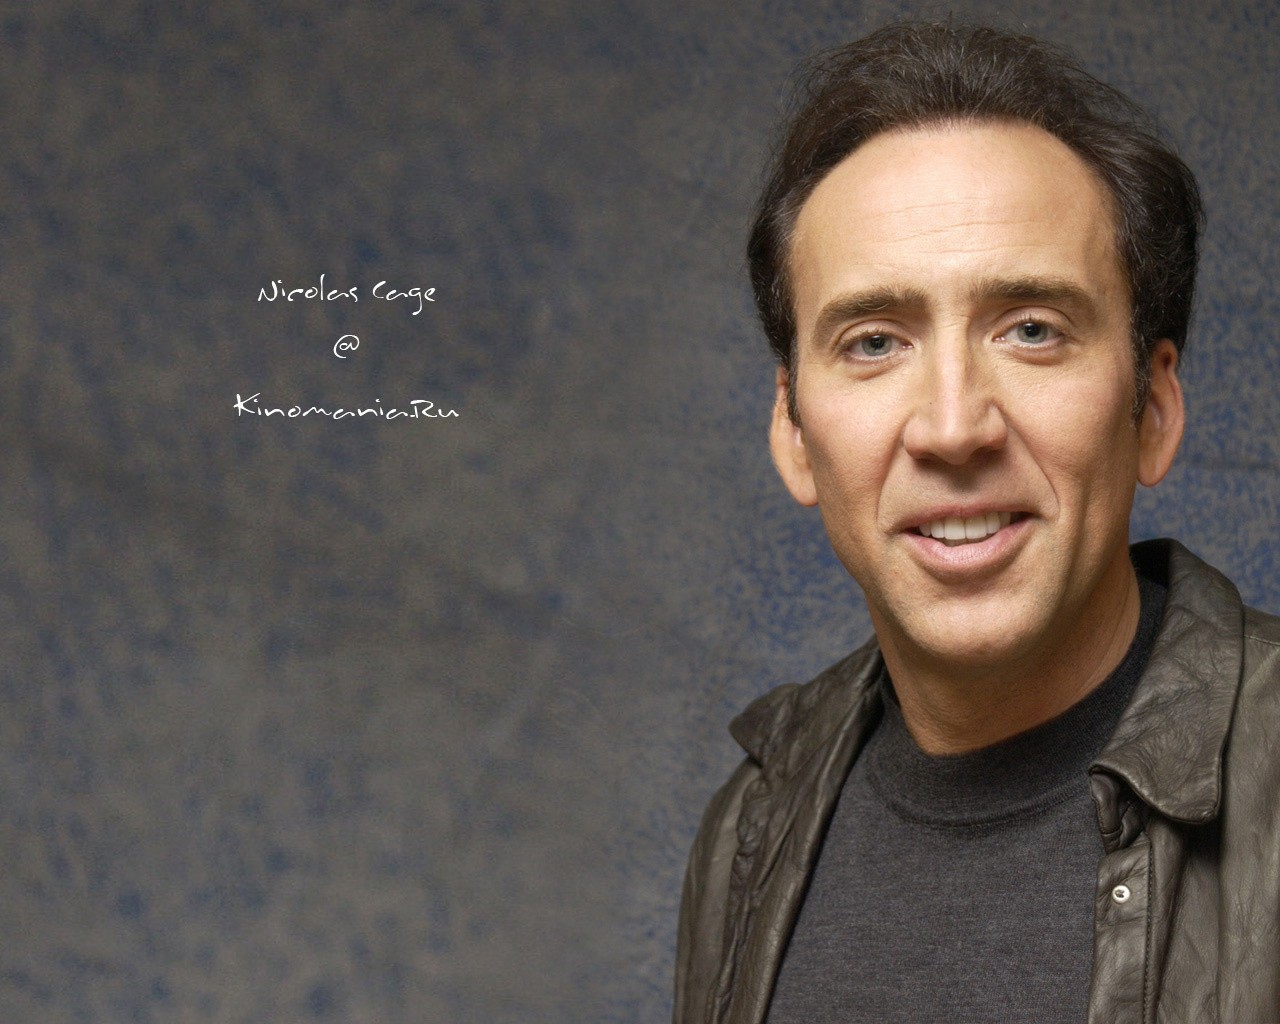 Wallpaper photo actor Nicolas Cage images for desktop section мужчины   download